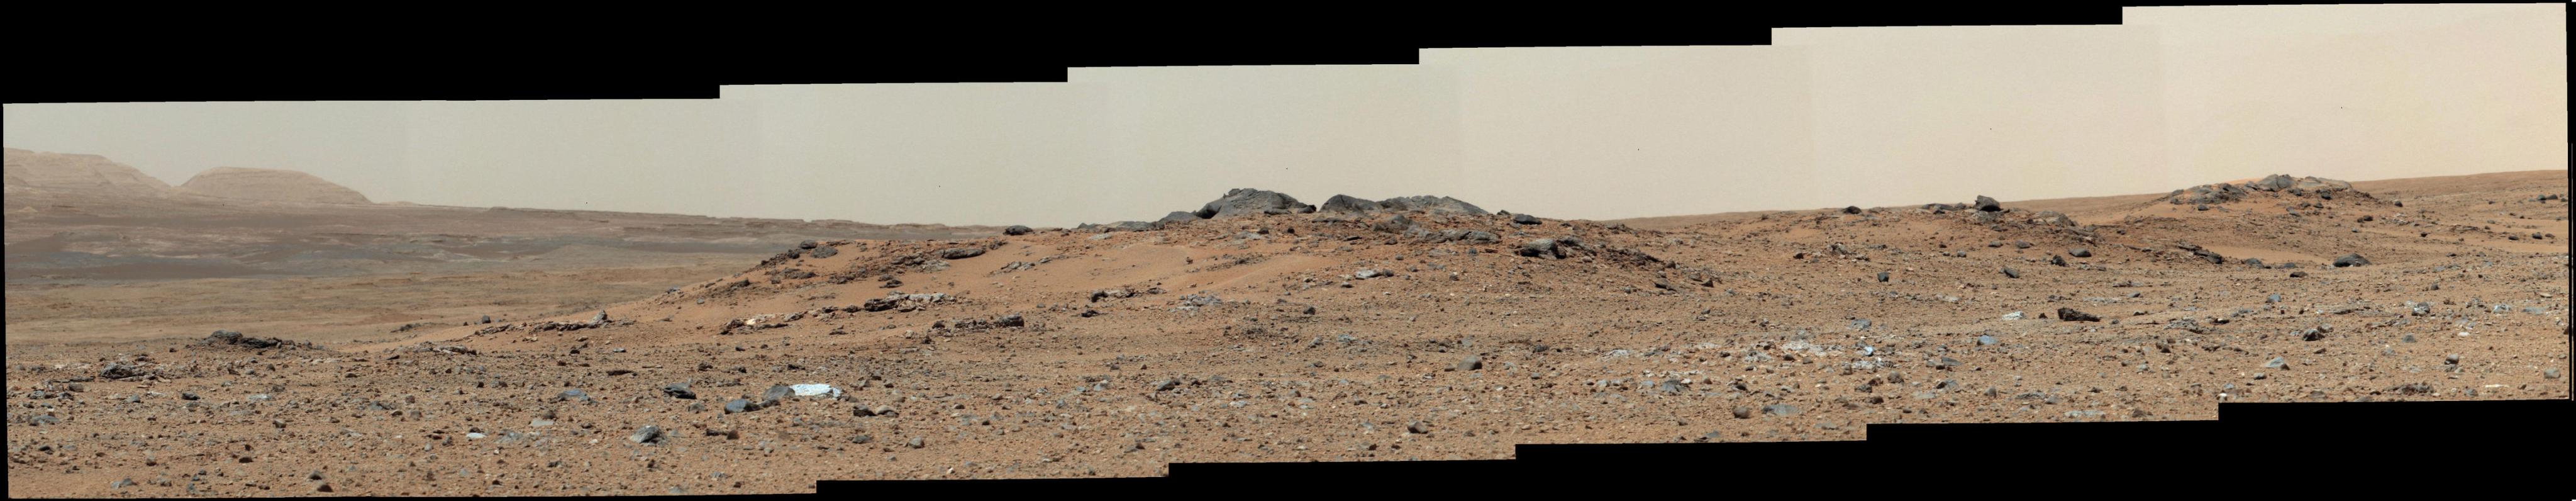 This scene combines seven images from the telephoto-lens camera on the right side of the Mast Camera (Mastcam) instrument on NASA's Mars rover Curiosity.